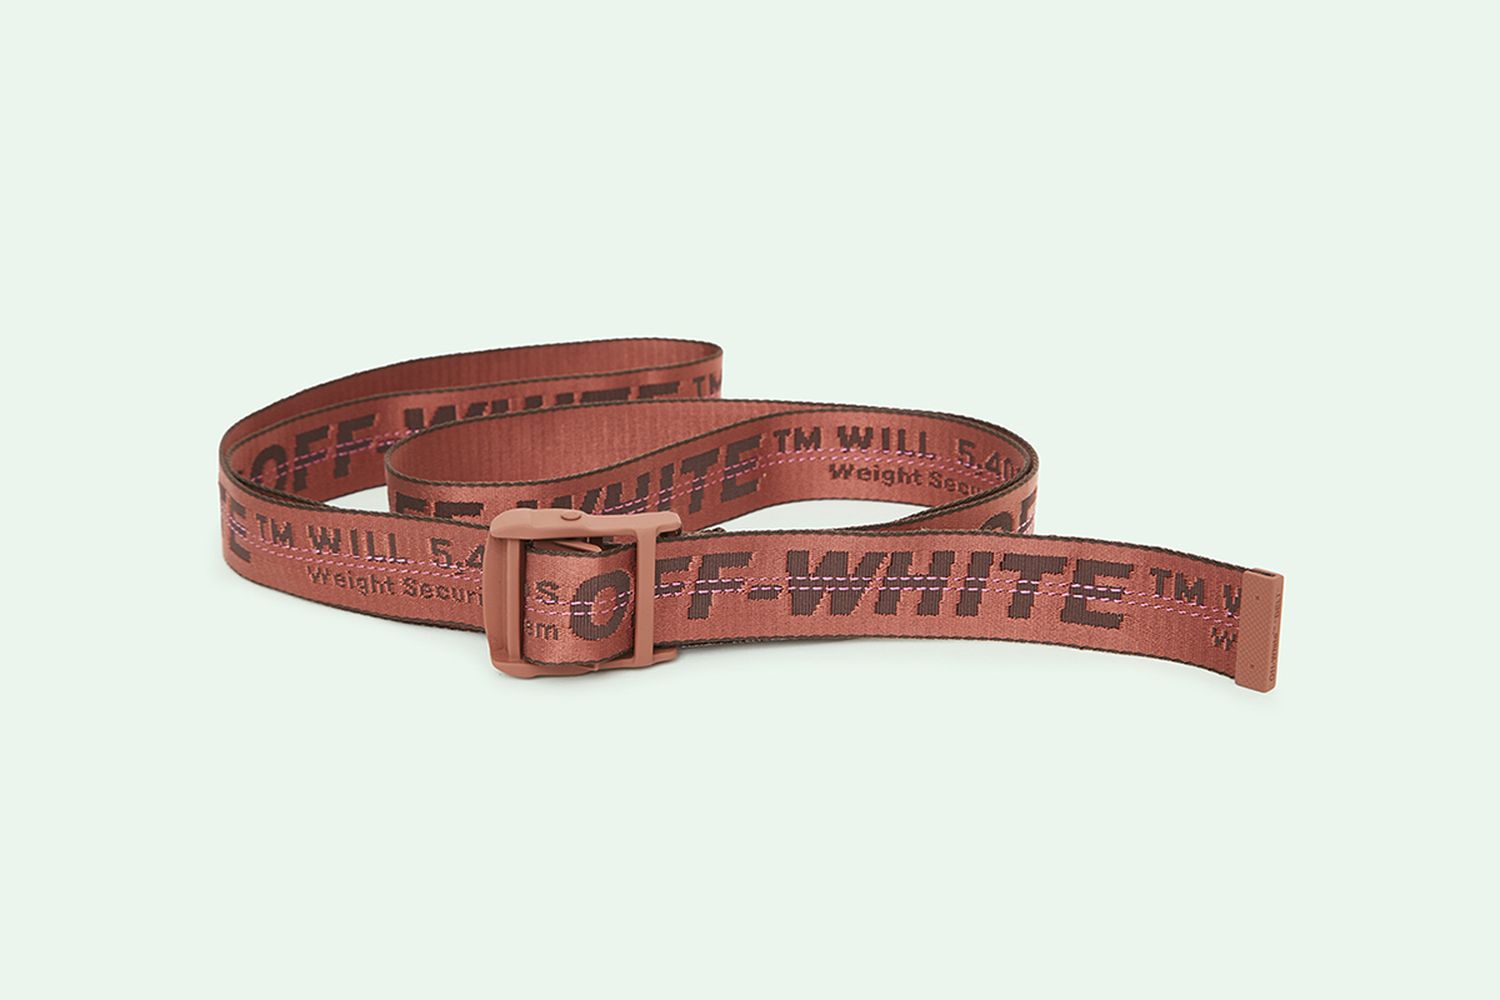 Here's What the OFF-WHITE Zip Tie Is Actually For